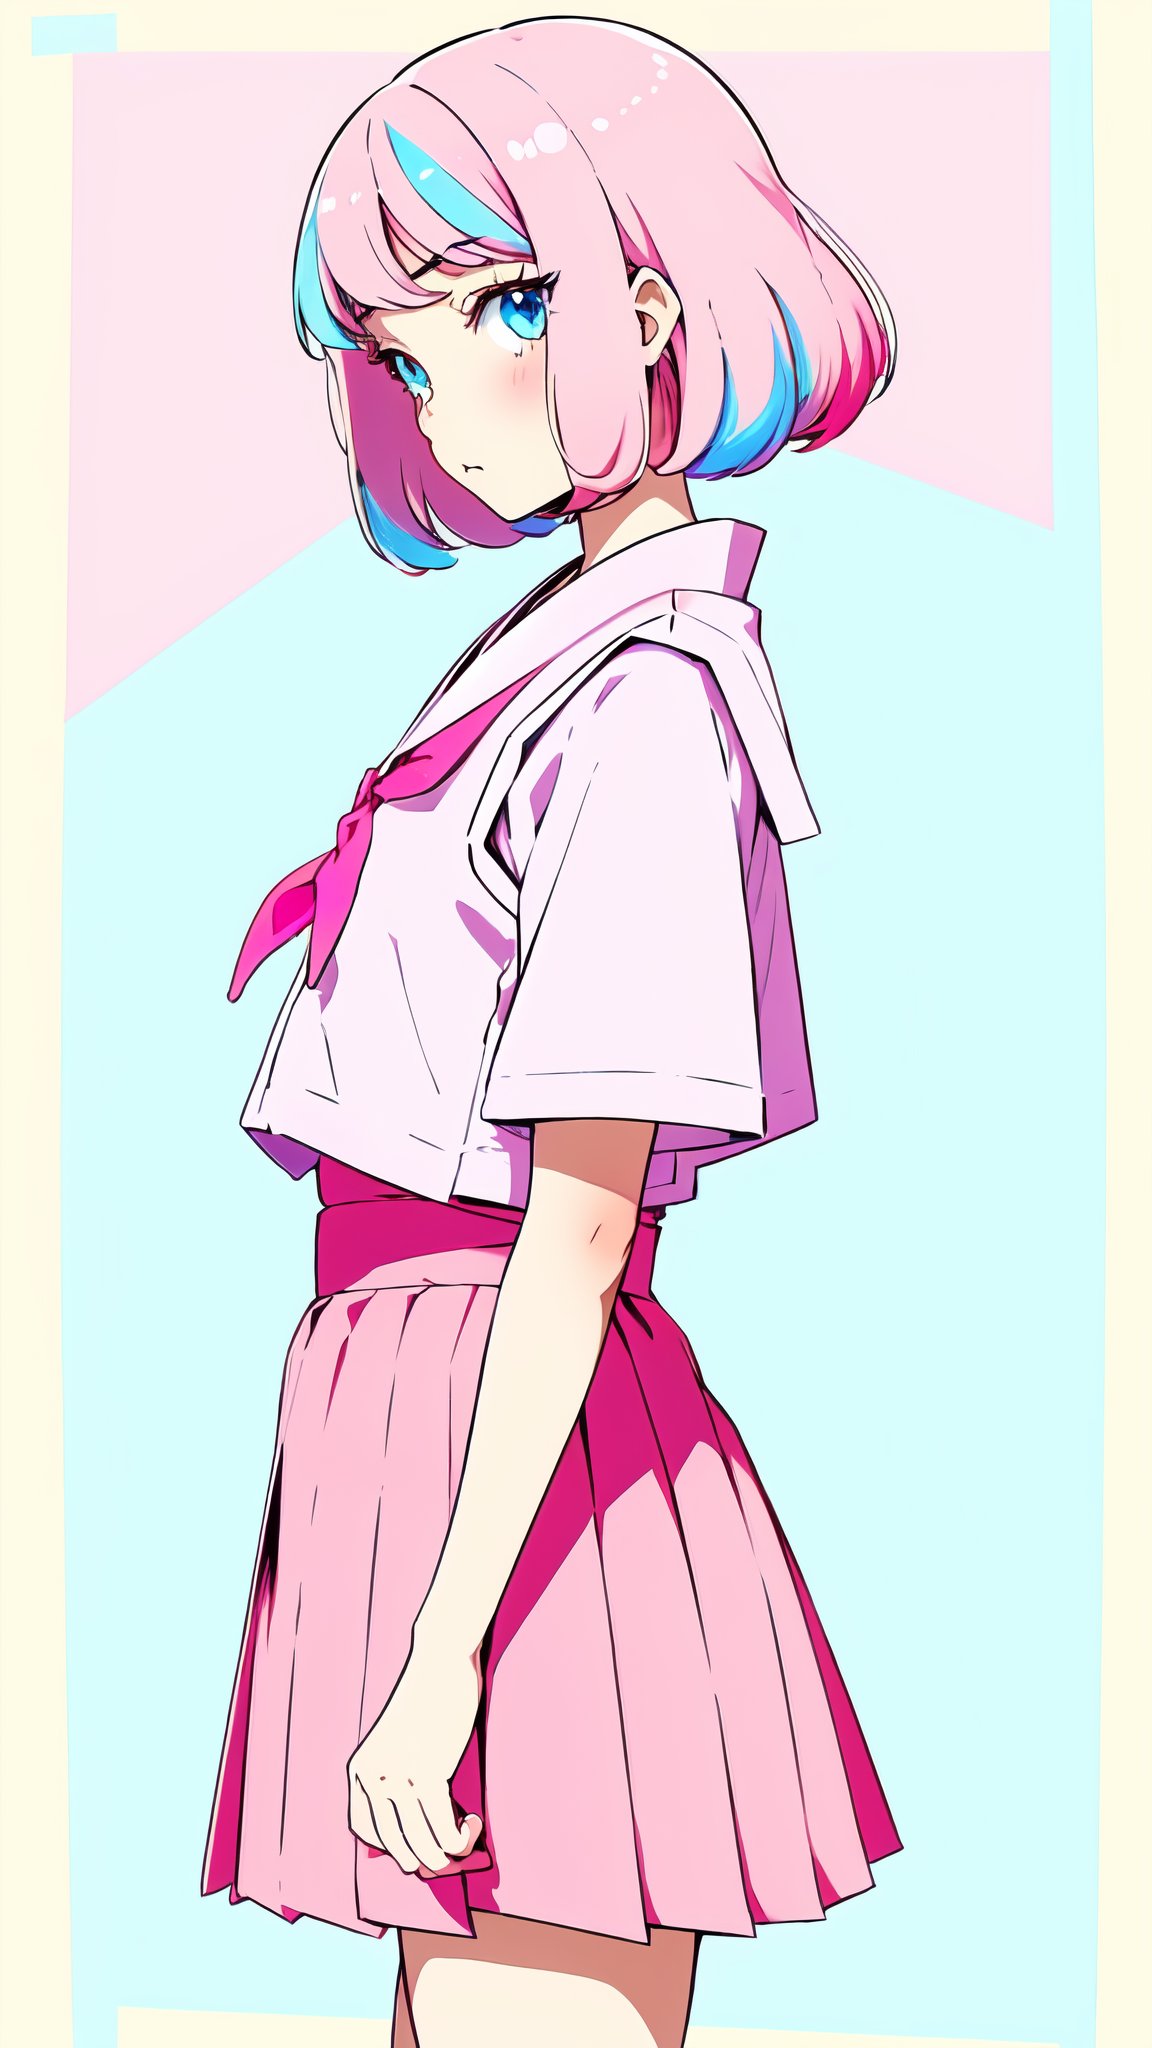 1girl ((kawaii)) Japanese Anime // Manga style Japanese Schoolgirl posing, viewed from the side, ((Colorful)) Pastel, Electric baby blues, light vibrant pinks, Extremely finely detailed, Very flat style, flat stylistically flat drawing flat